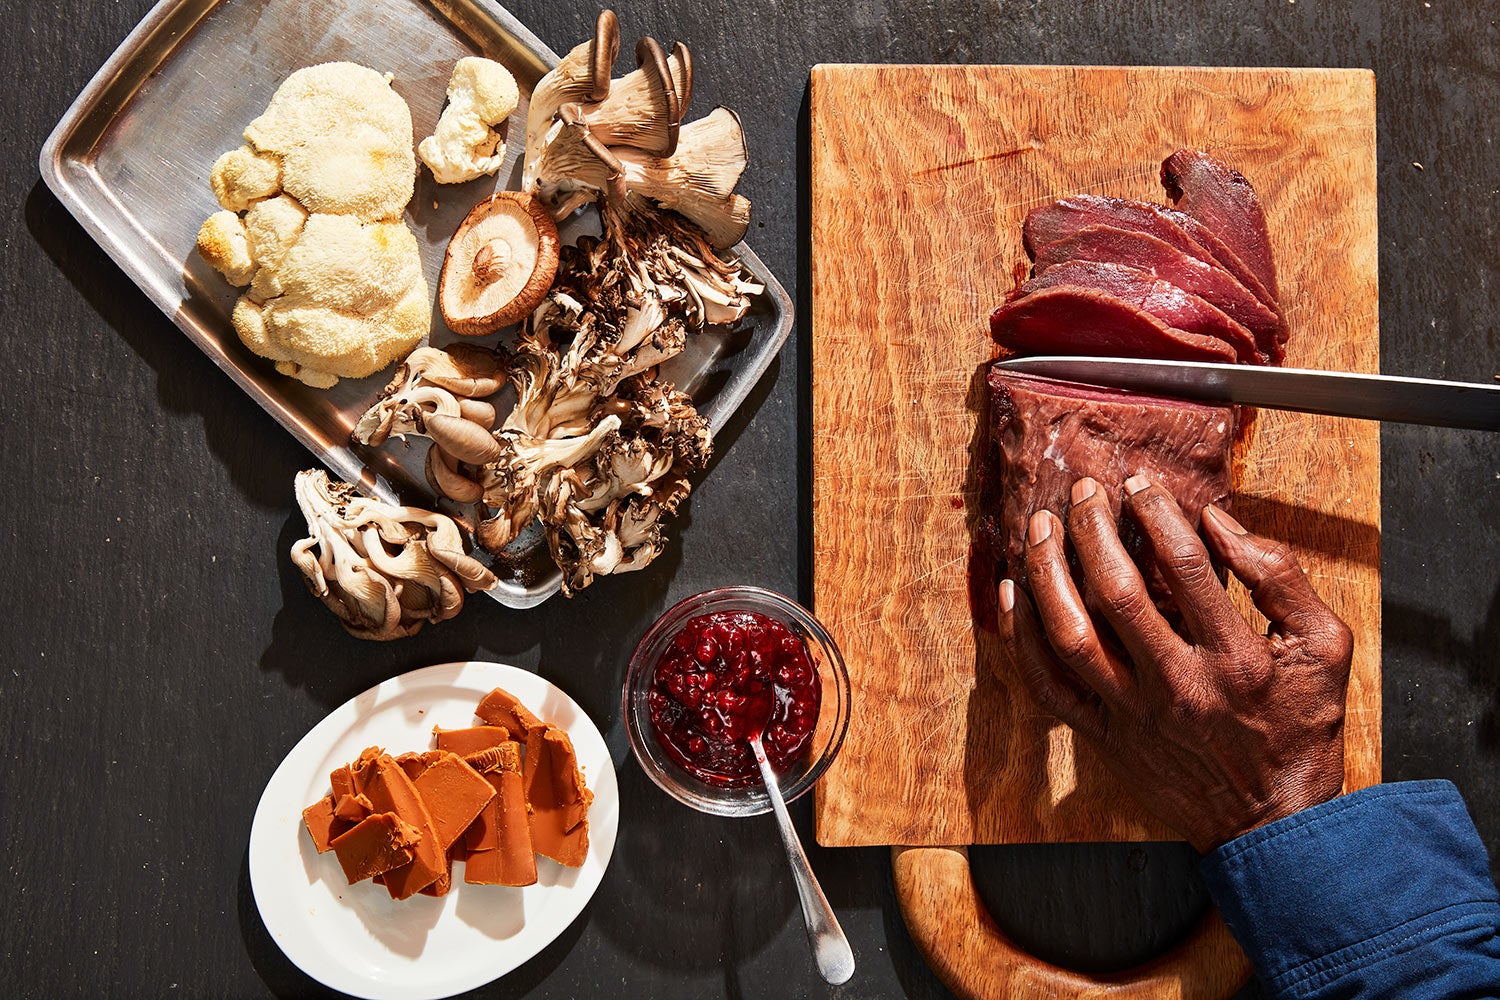 hand holds meat steady as it's being thinly sliced on cutting board sitting next to pay of mushrooms, plate of cheese, and bowl of berries